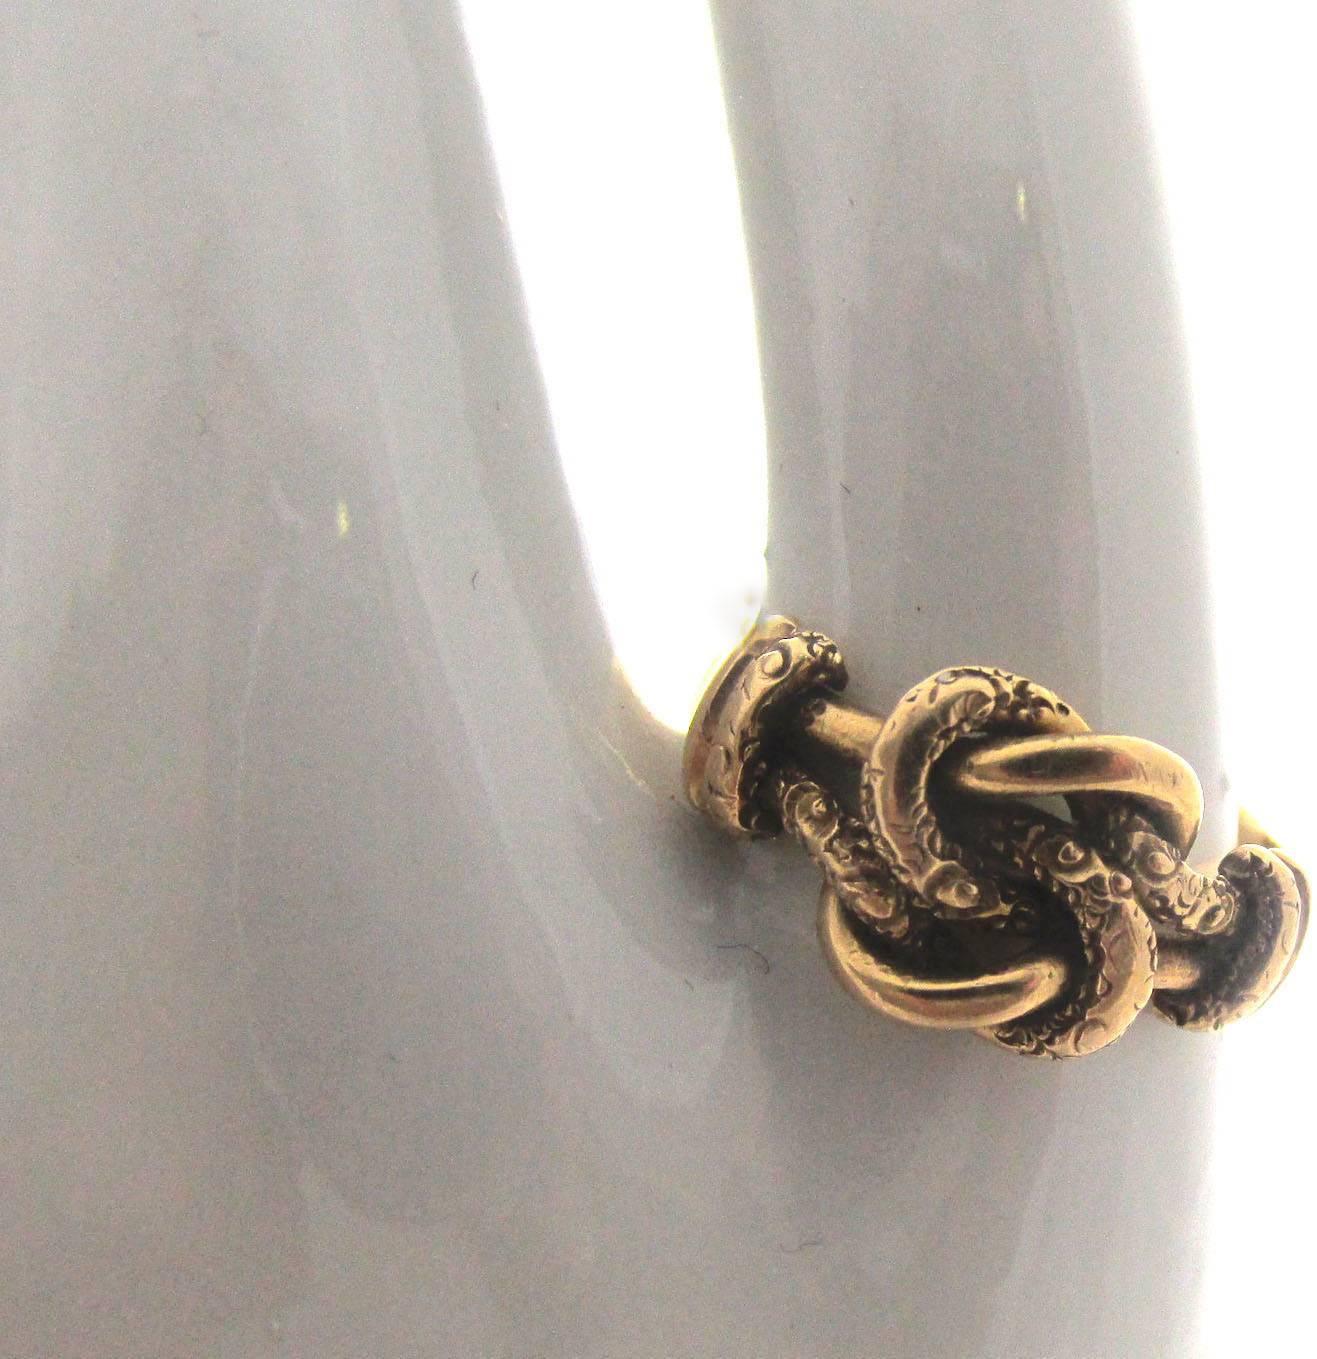 Antique Gold Knot Ring 4